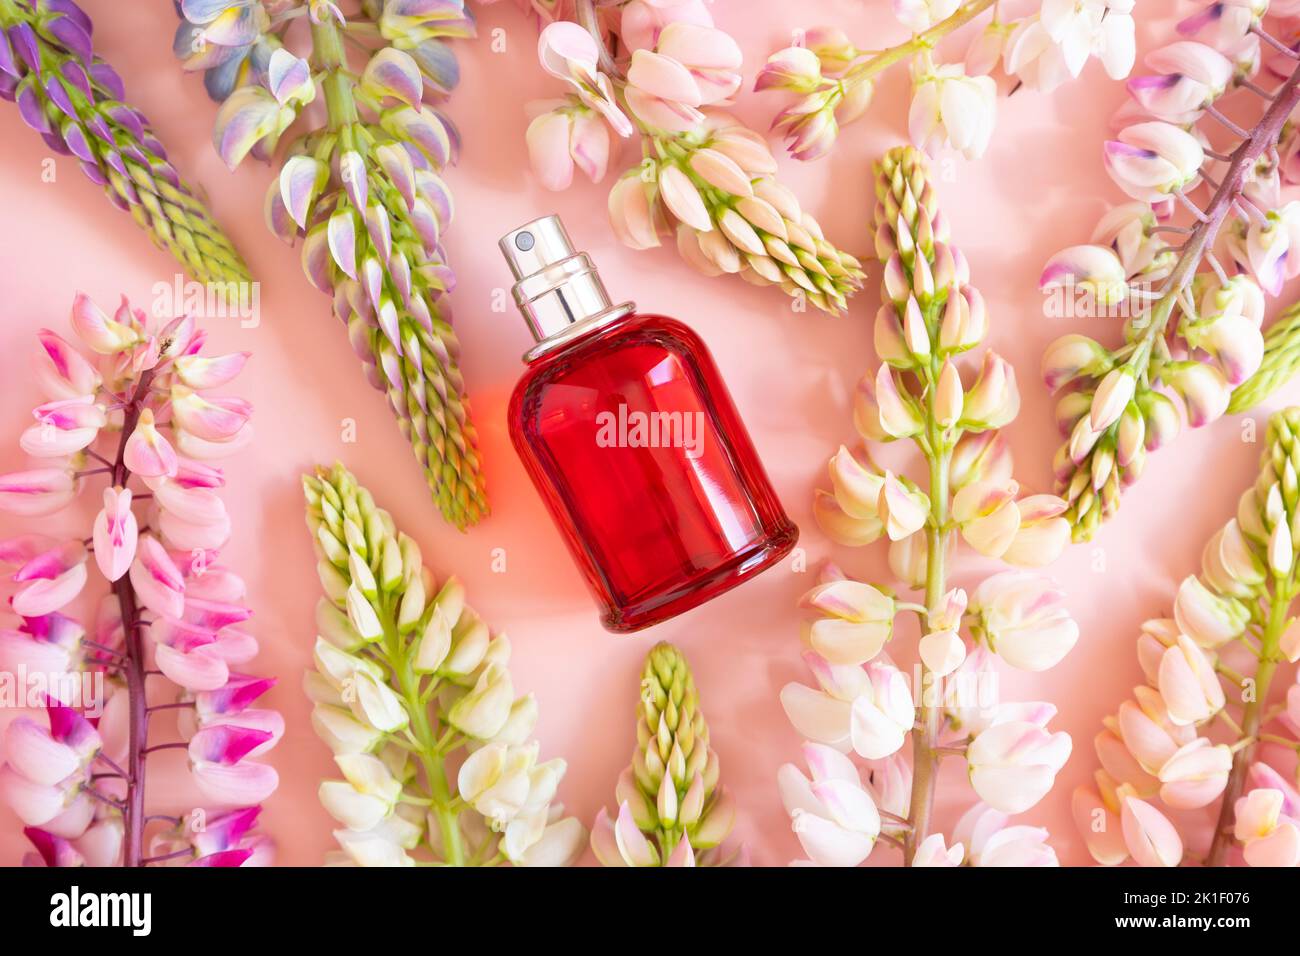 Perfume spray red bottle and pink lupine flowers on pink background. Front top view, summer flat lay, mockup. Stock Photo